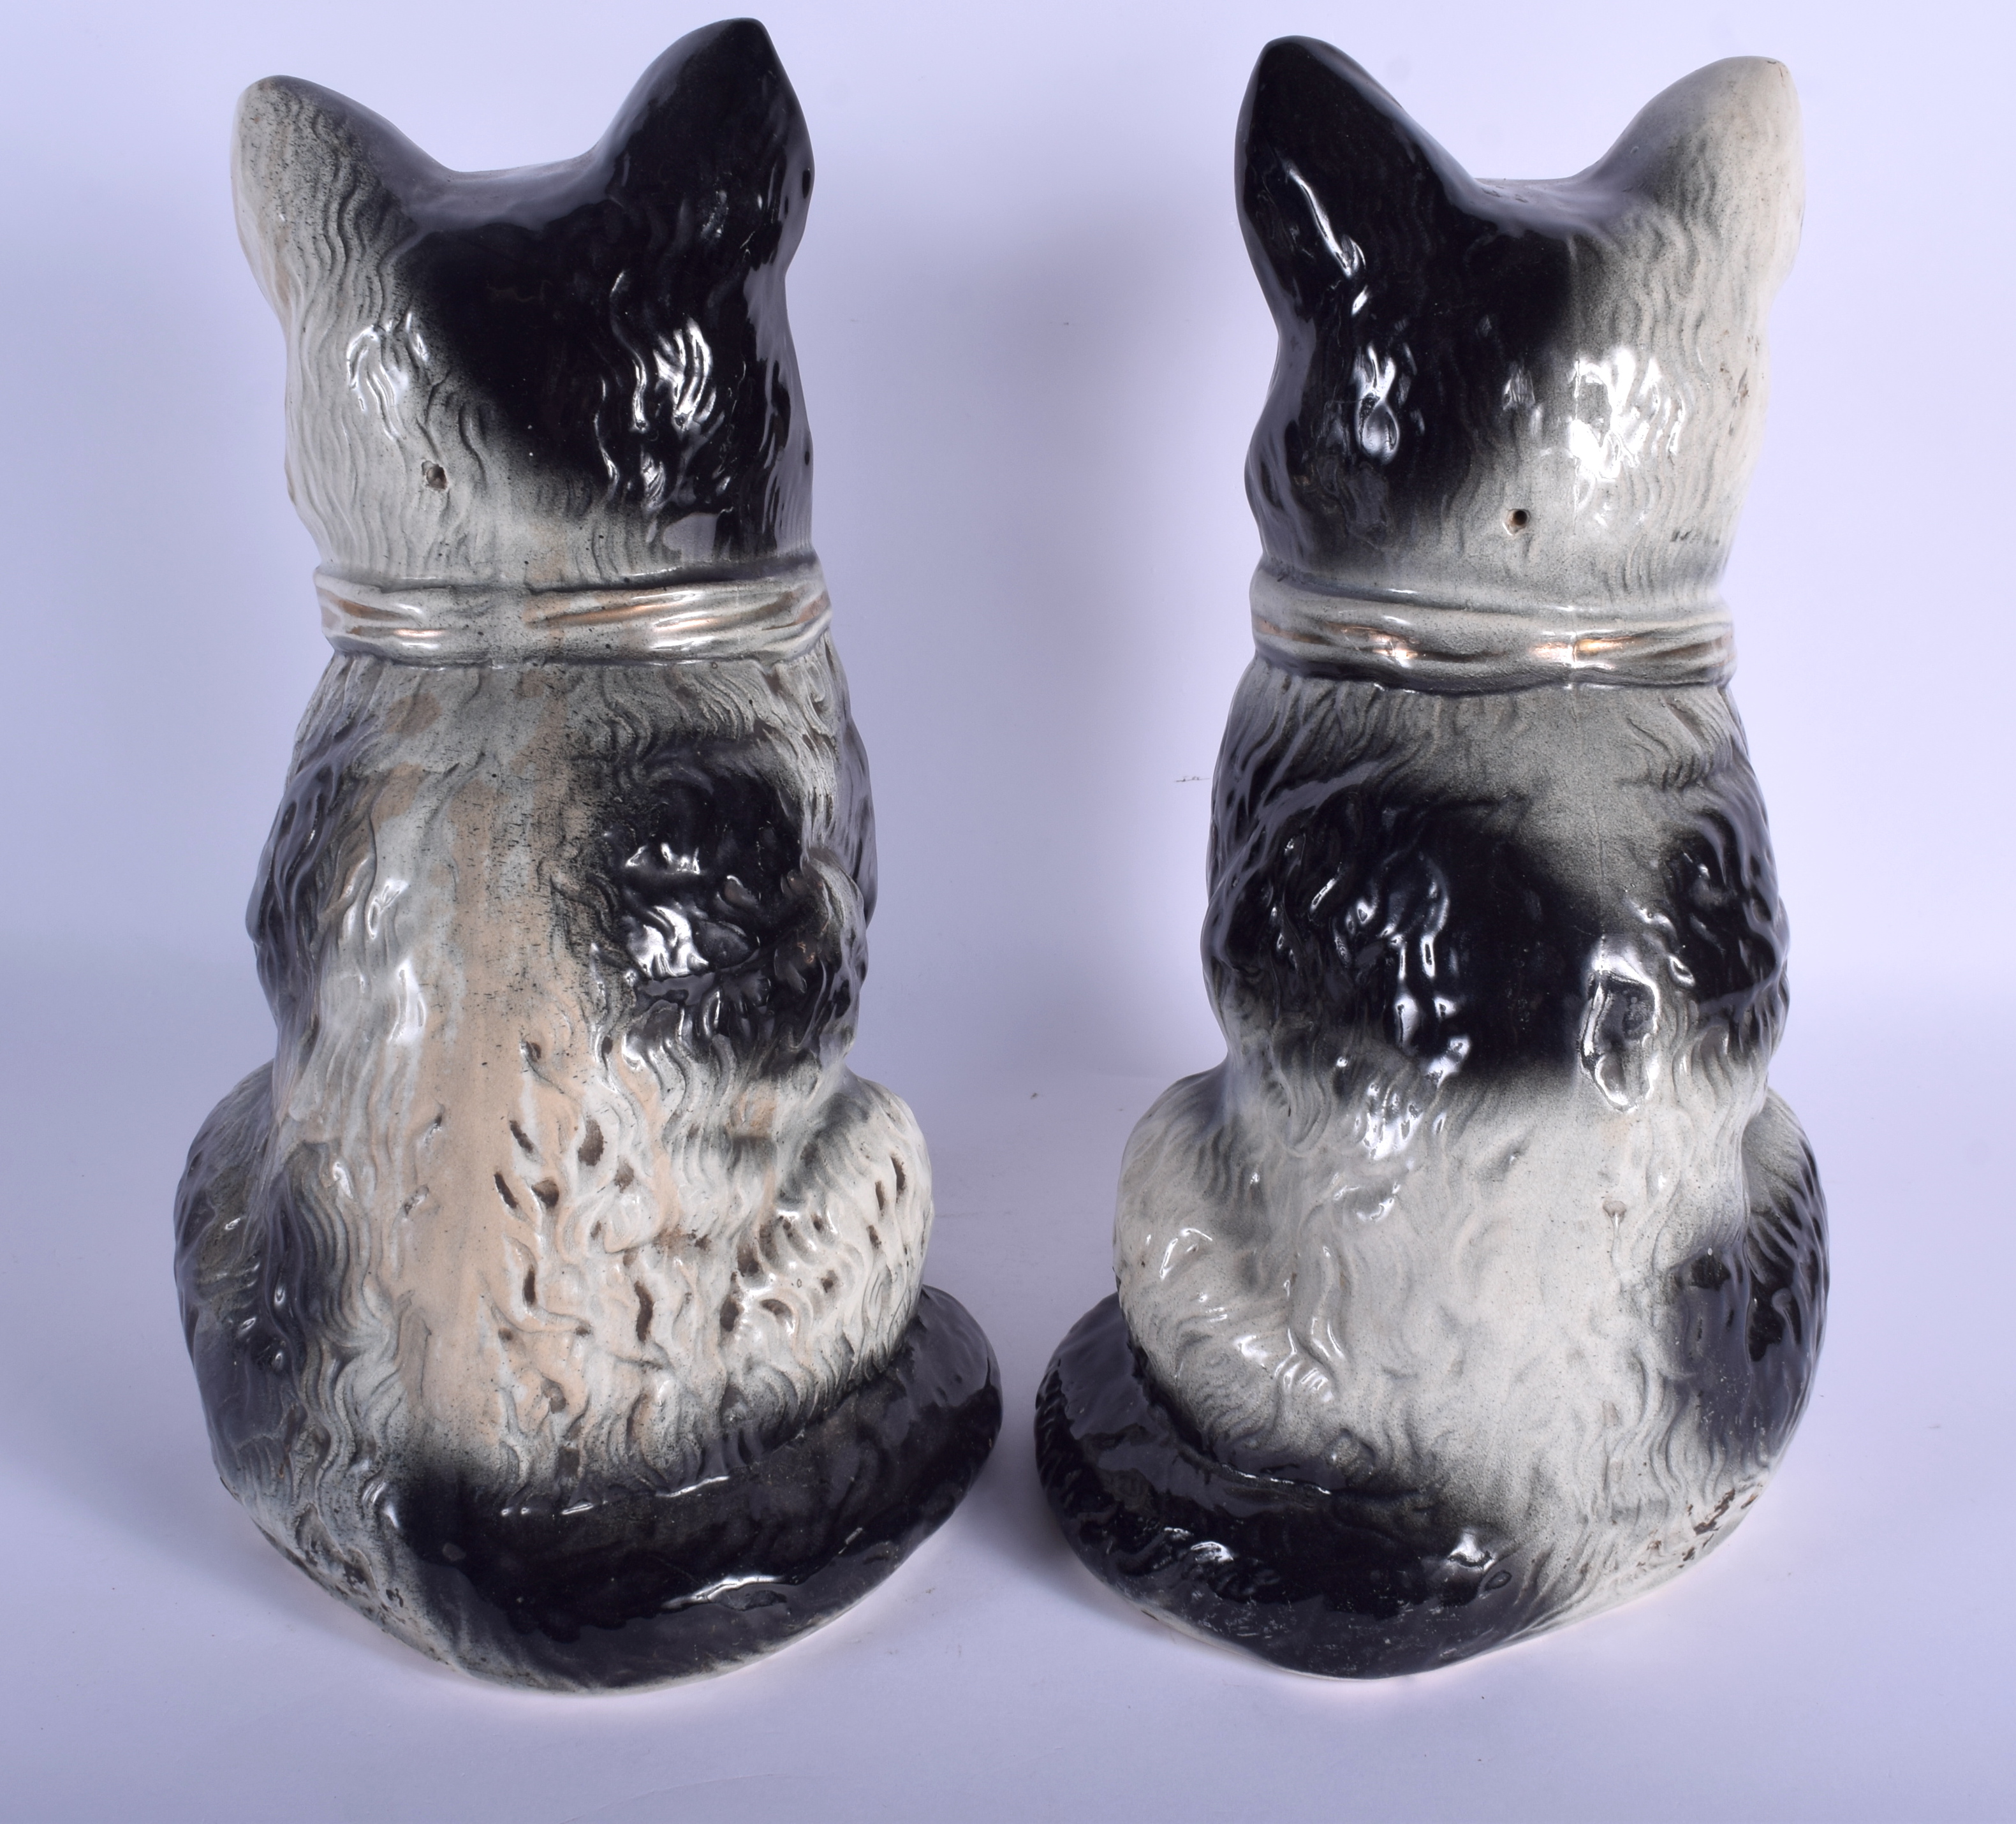 A LARGE PAIR OF 19TH CENTURY CONTINENTAL POTTERY CATS modelled in gilt bow ties. 34 cm high. - Image 2 of 3